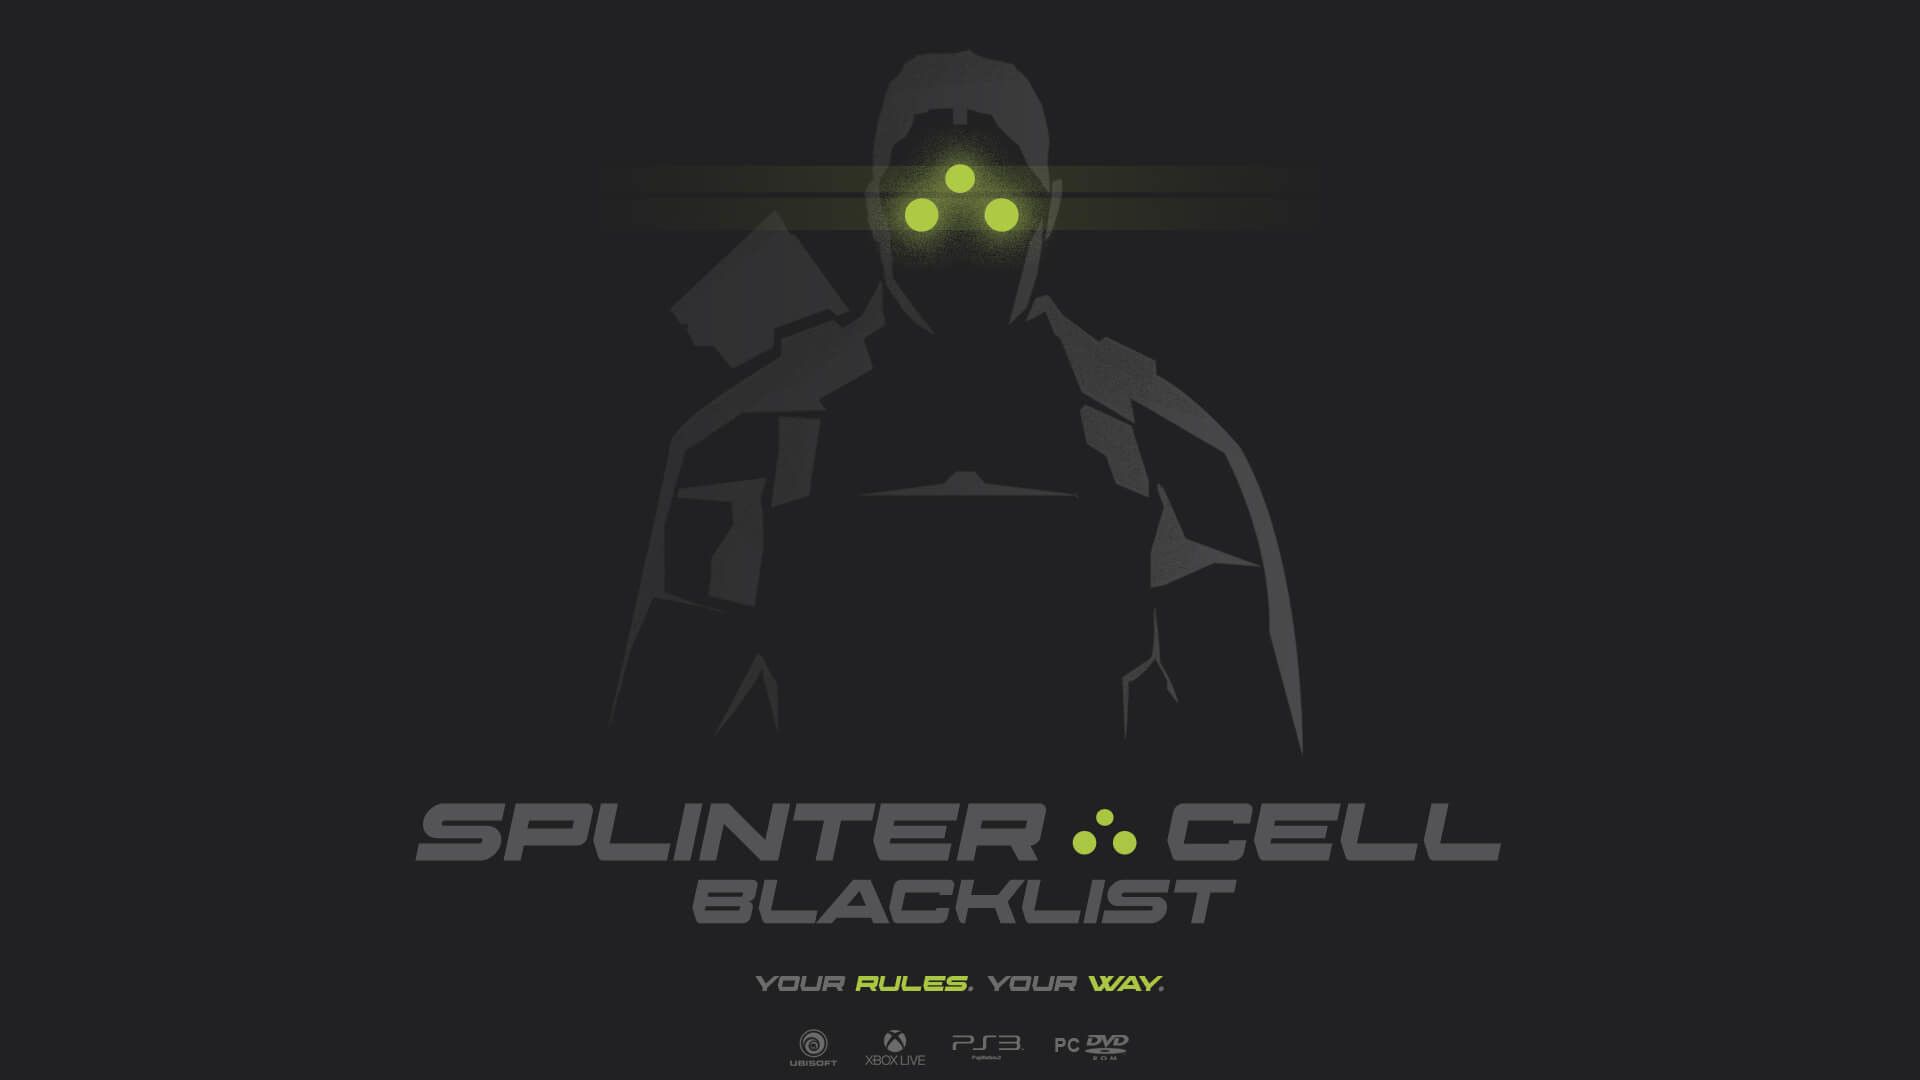 Tom Clancys Splinter Cell Chaos Theory Wallpapers